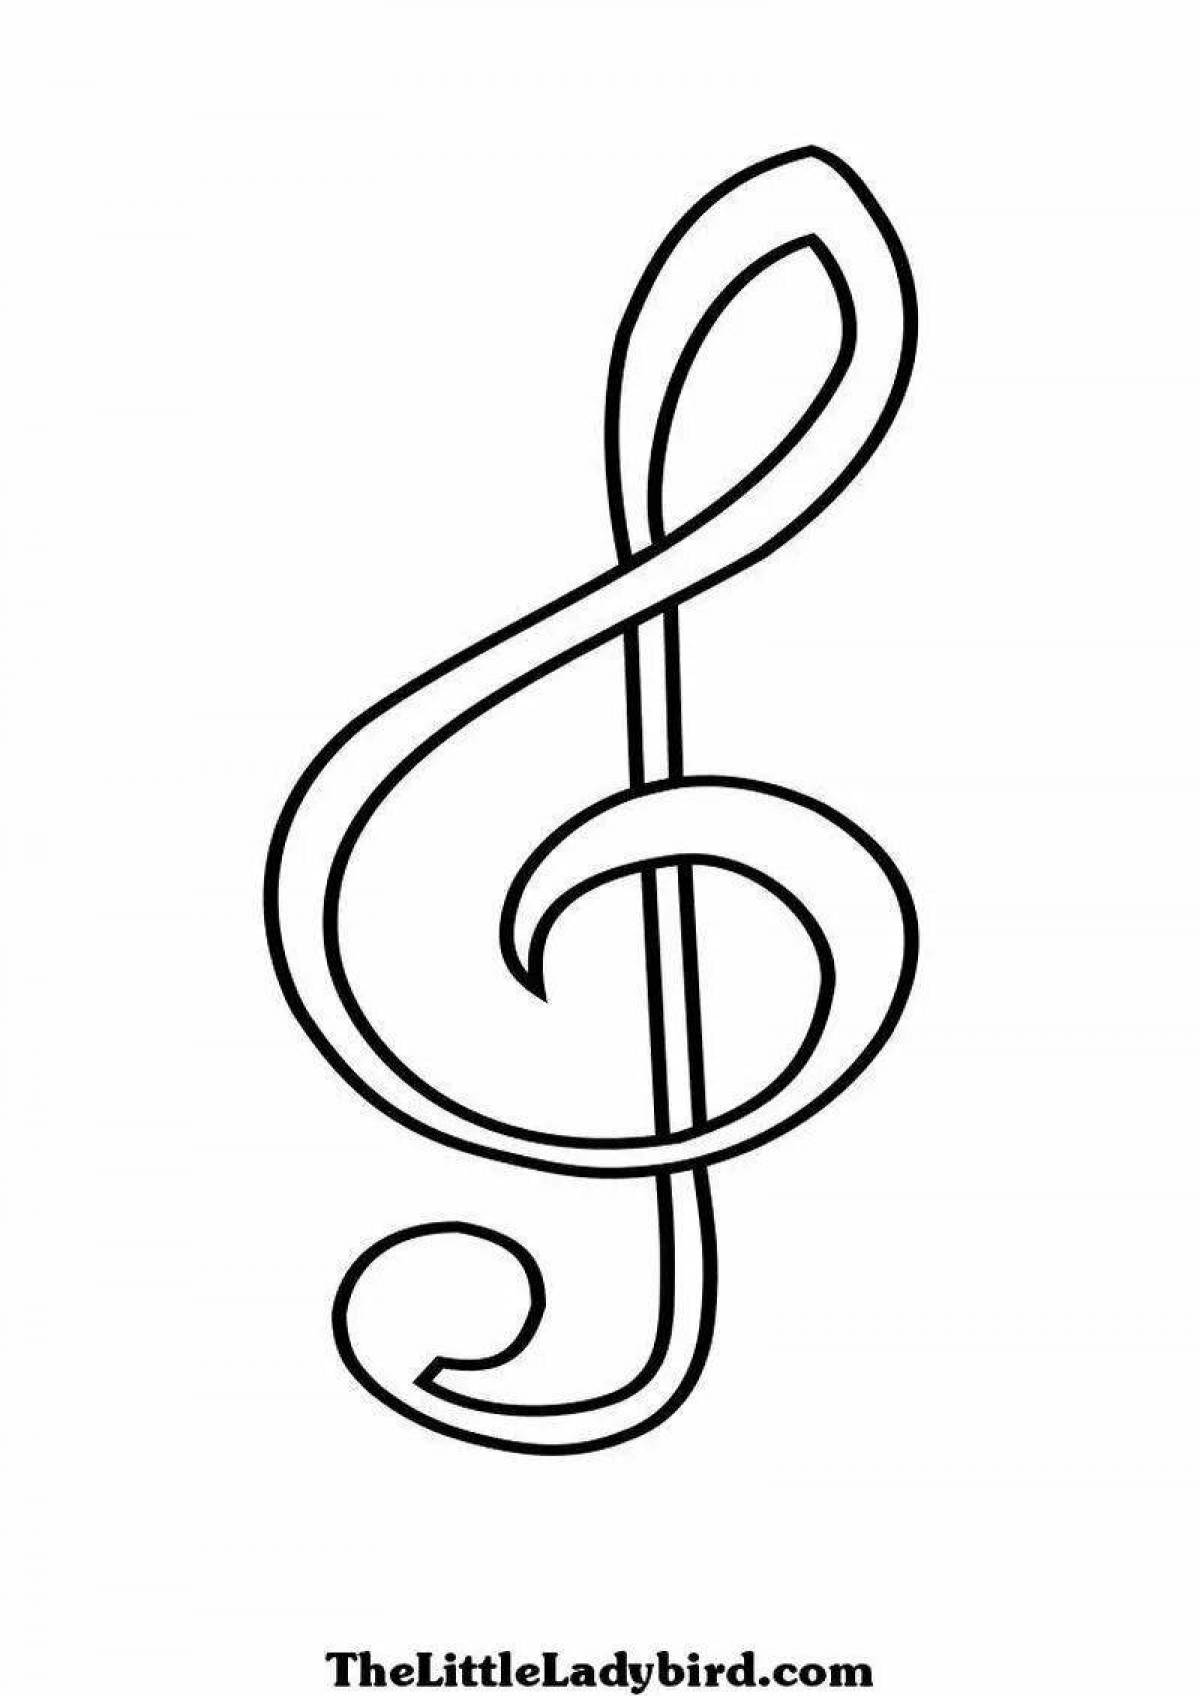 Exciting treble clef for kids